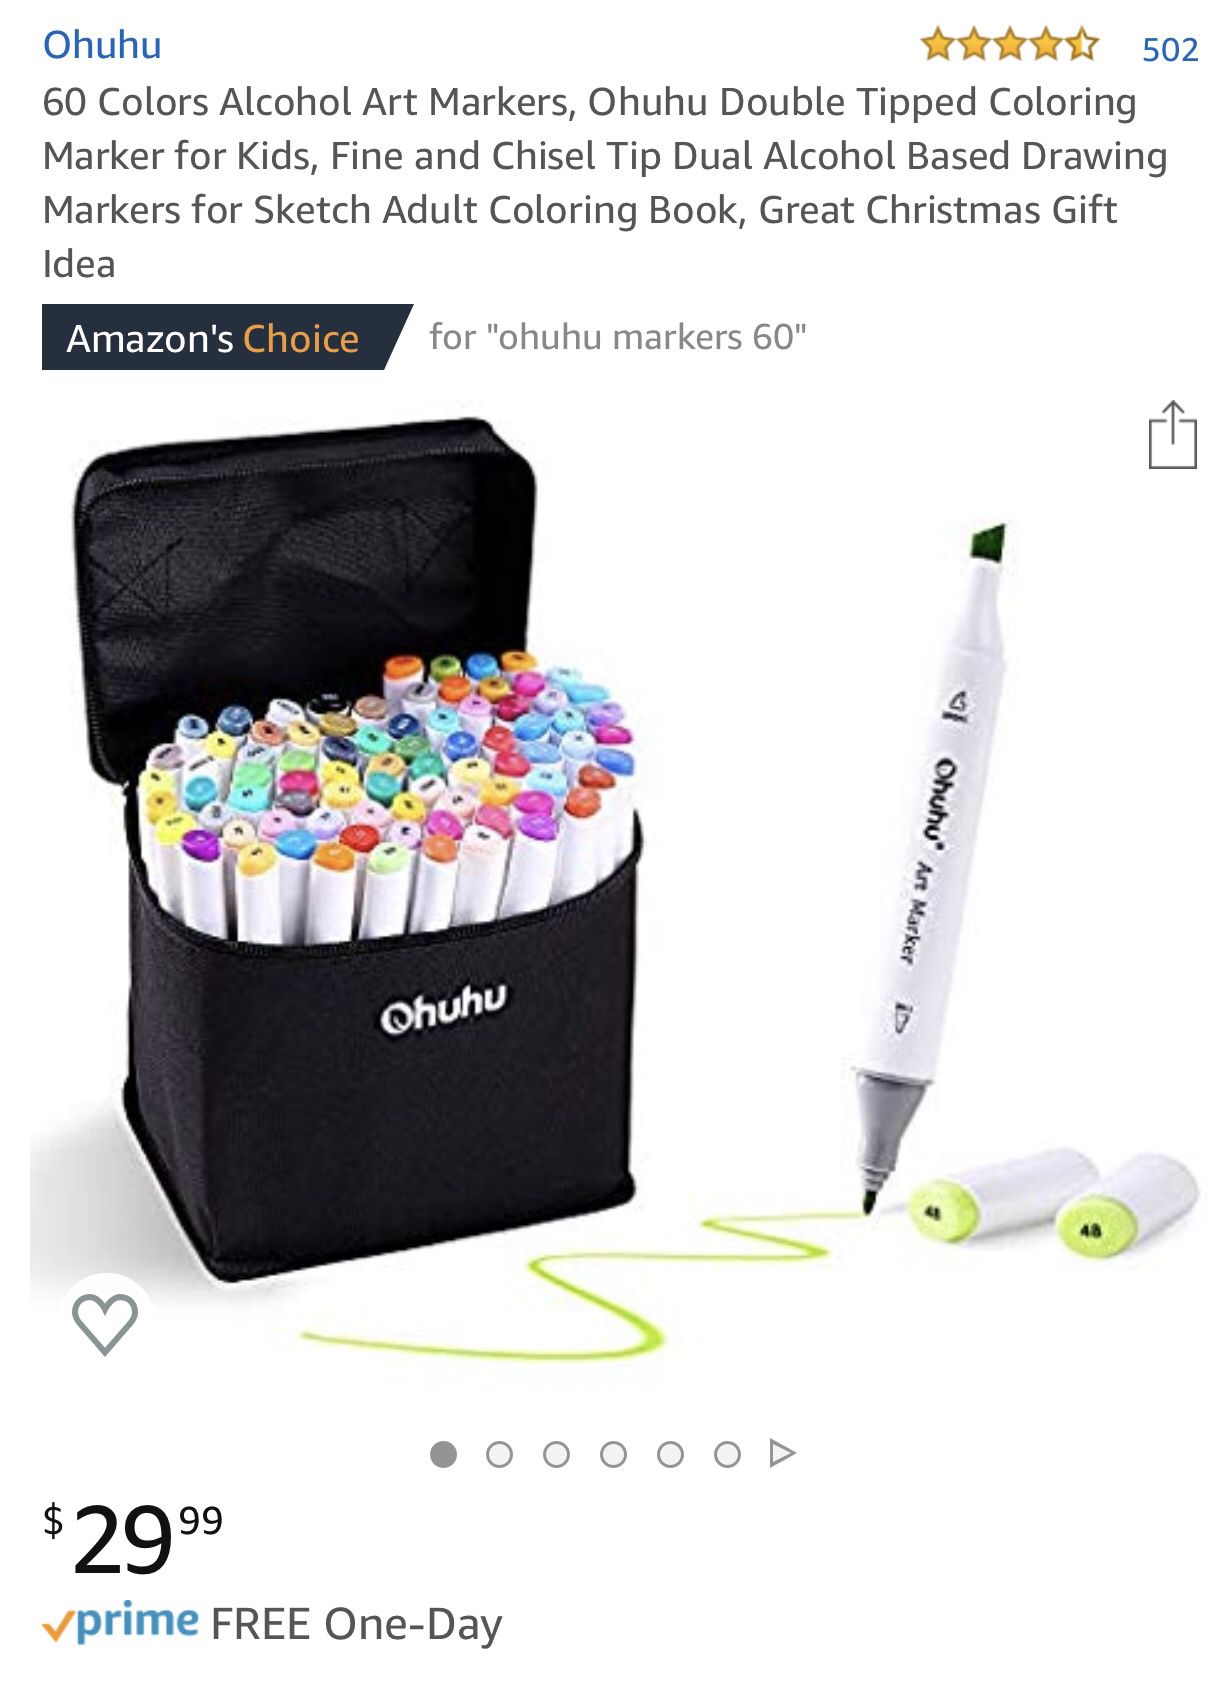 Ohuhu Alcohol based markers - Brand New for Sale in Anaheim, CA - OfferUp